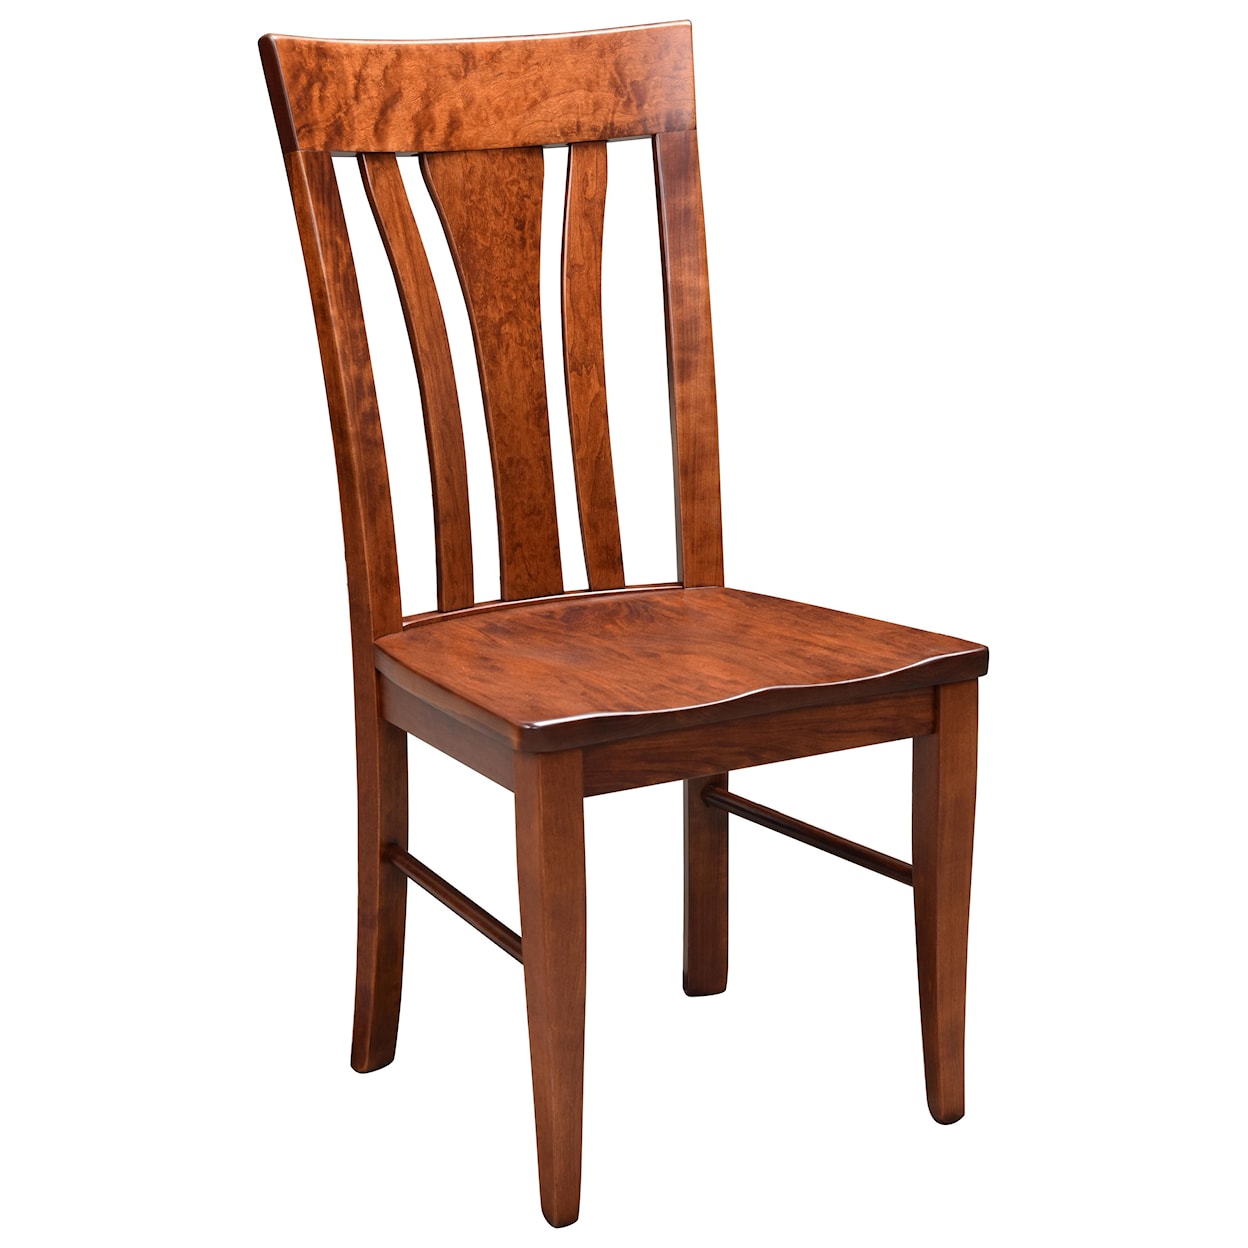 Wengerd Wood Products Mentor Side Chair